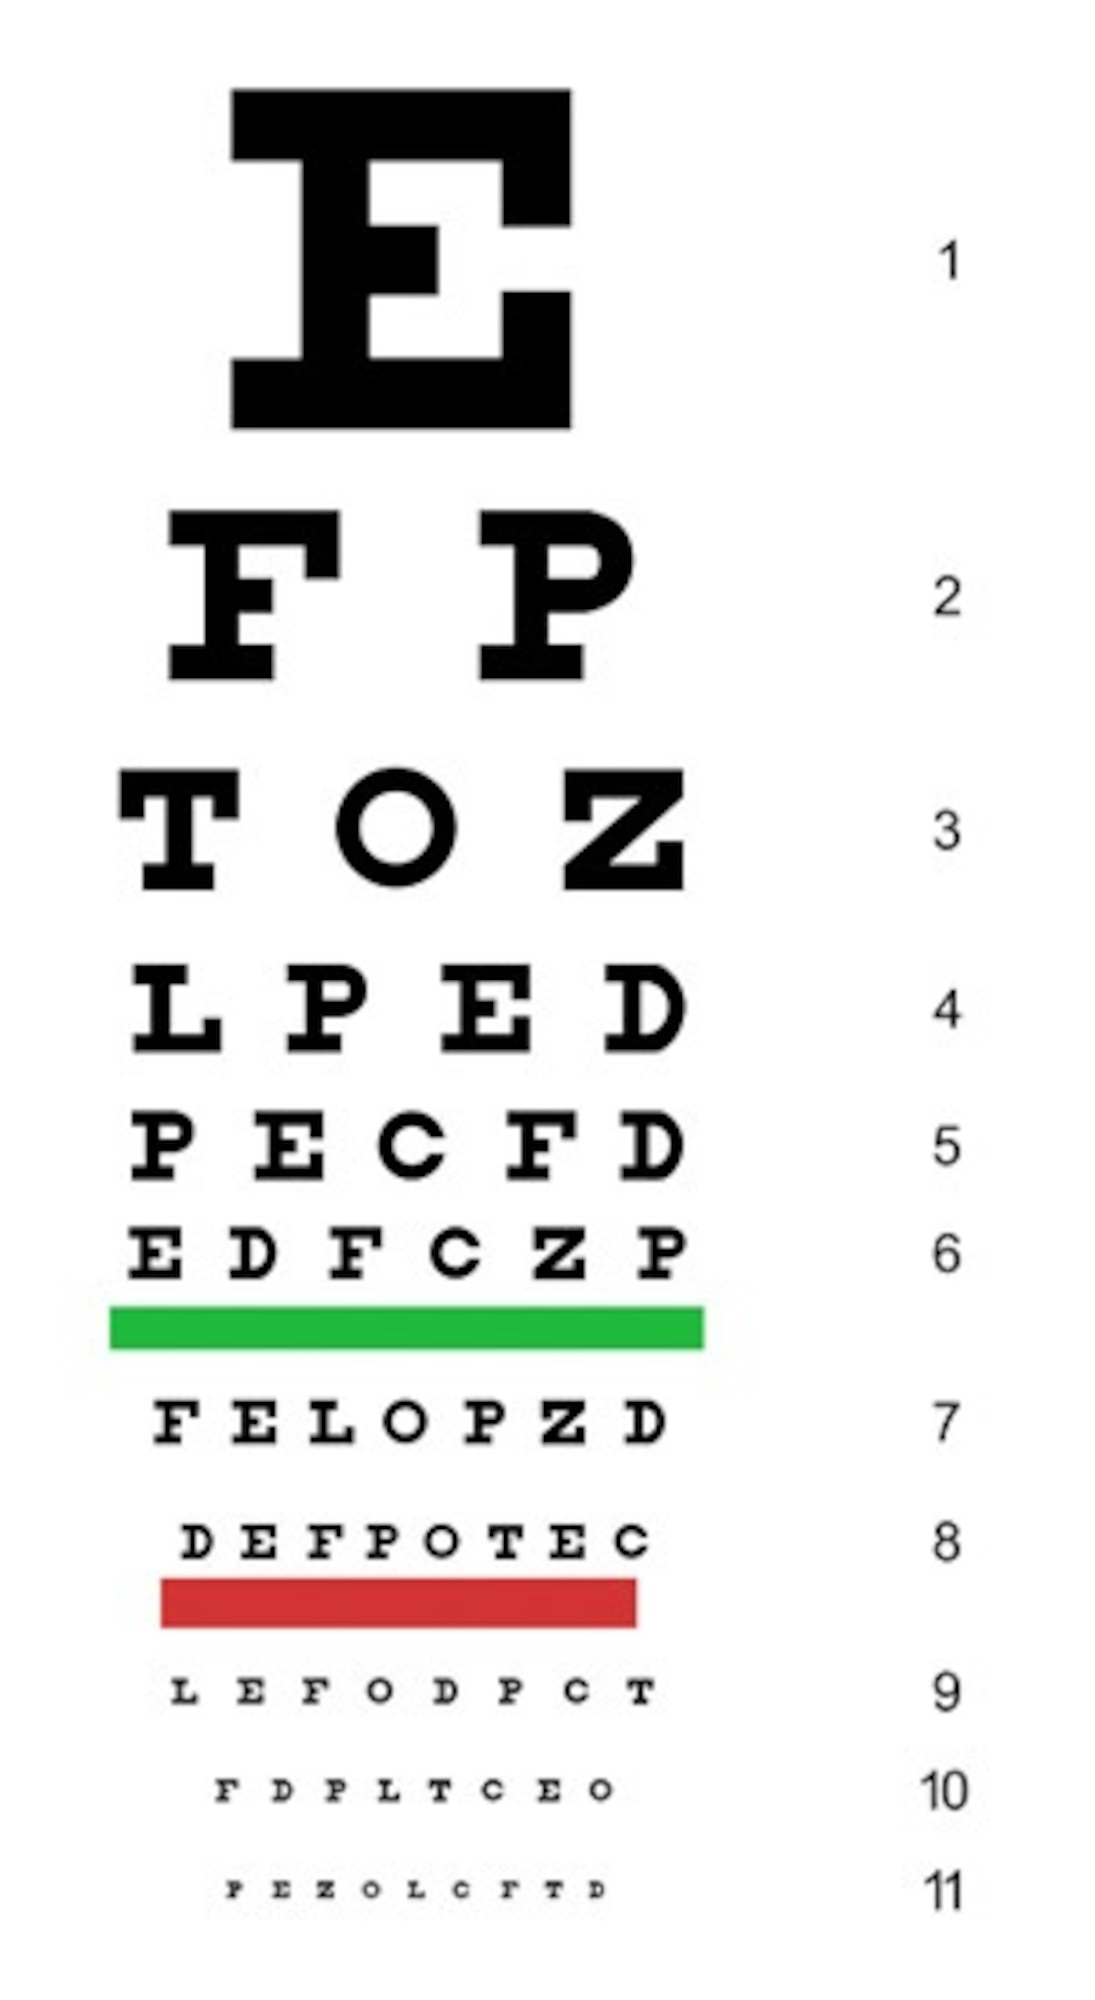 Snellen eye chart, developed by Dutch eye doctor Hermann Snellen in the 1860s. There are many variations of the Snellen eye chart, but in general they show 11 rows of capital letters. The top row contains one letter (usually the "big E," but other letters can be used). The other rows contain letters that are progressively smaller. During an eye exam, your eye doctor will ask you to find the smallest line of text letters that you can make out, and ask you to read it. If you can read the bottom row of letters, your visual acuity is very good. (DoD graphic)